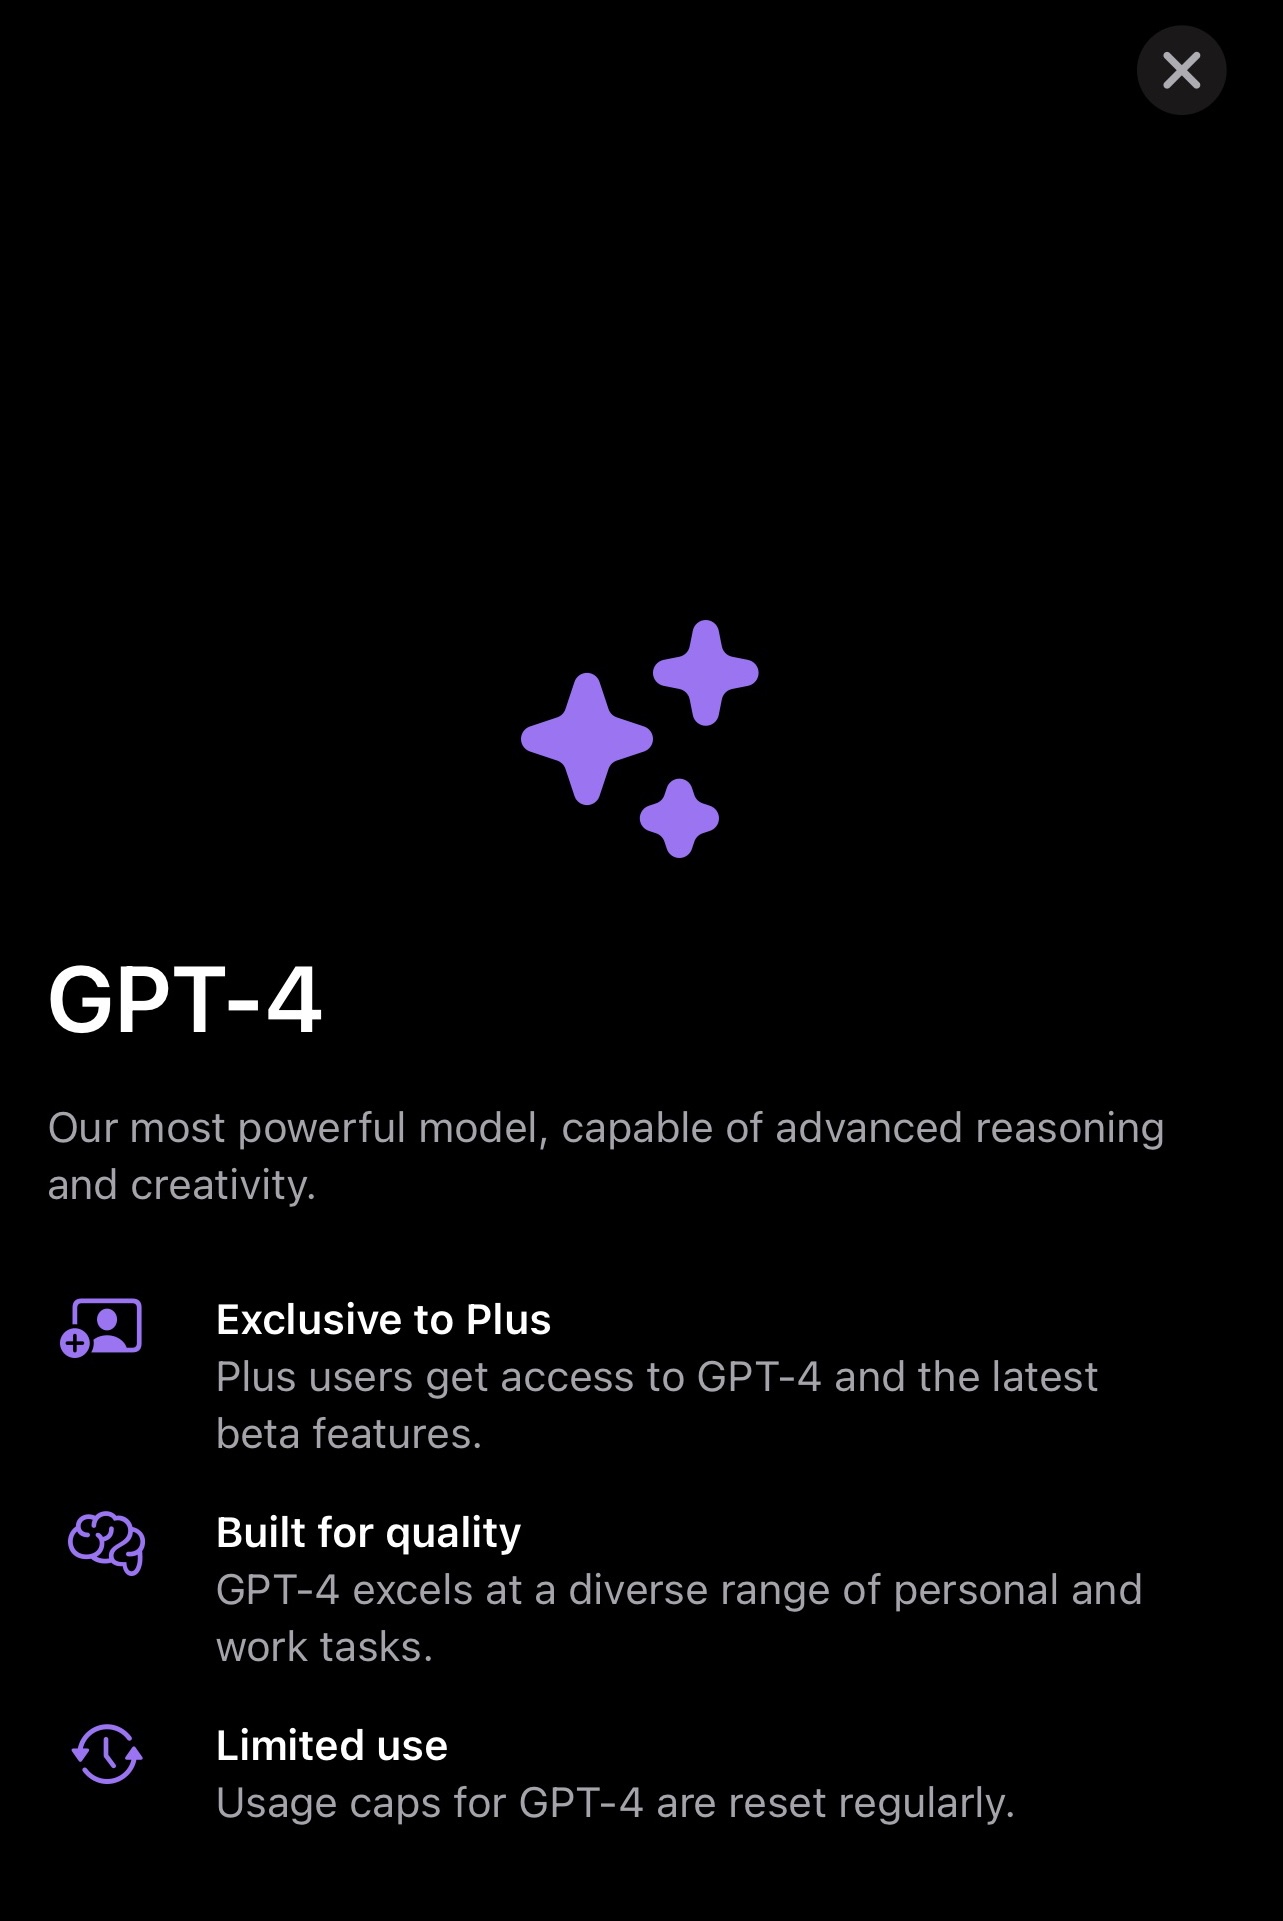 A Look Inside The New ChatGPT iPhone App From OpenAI